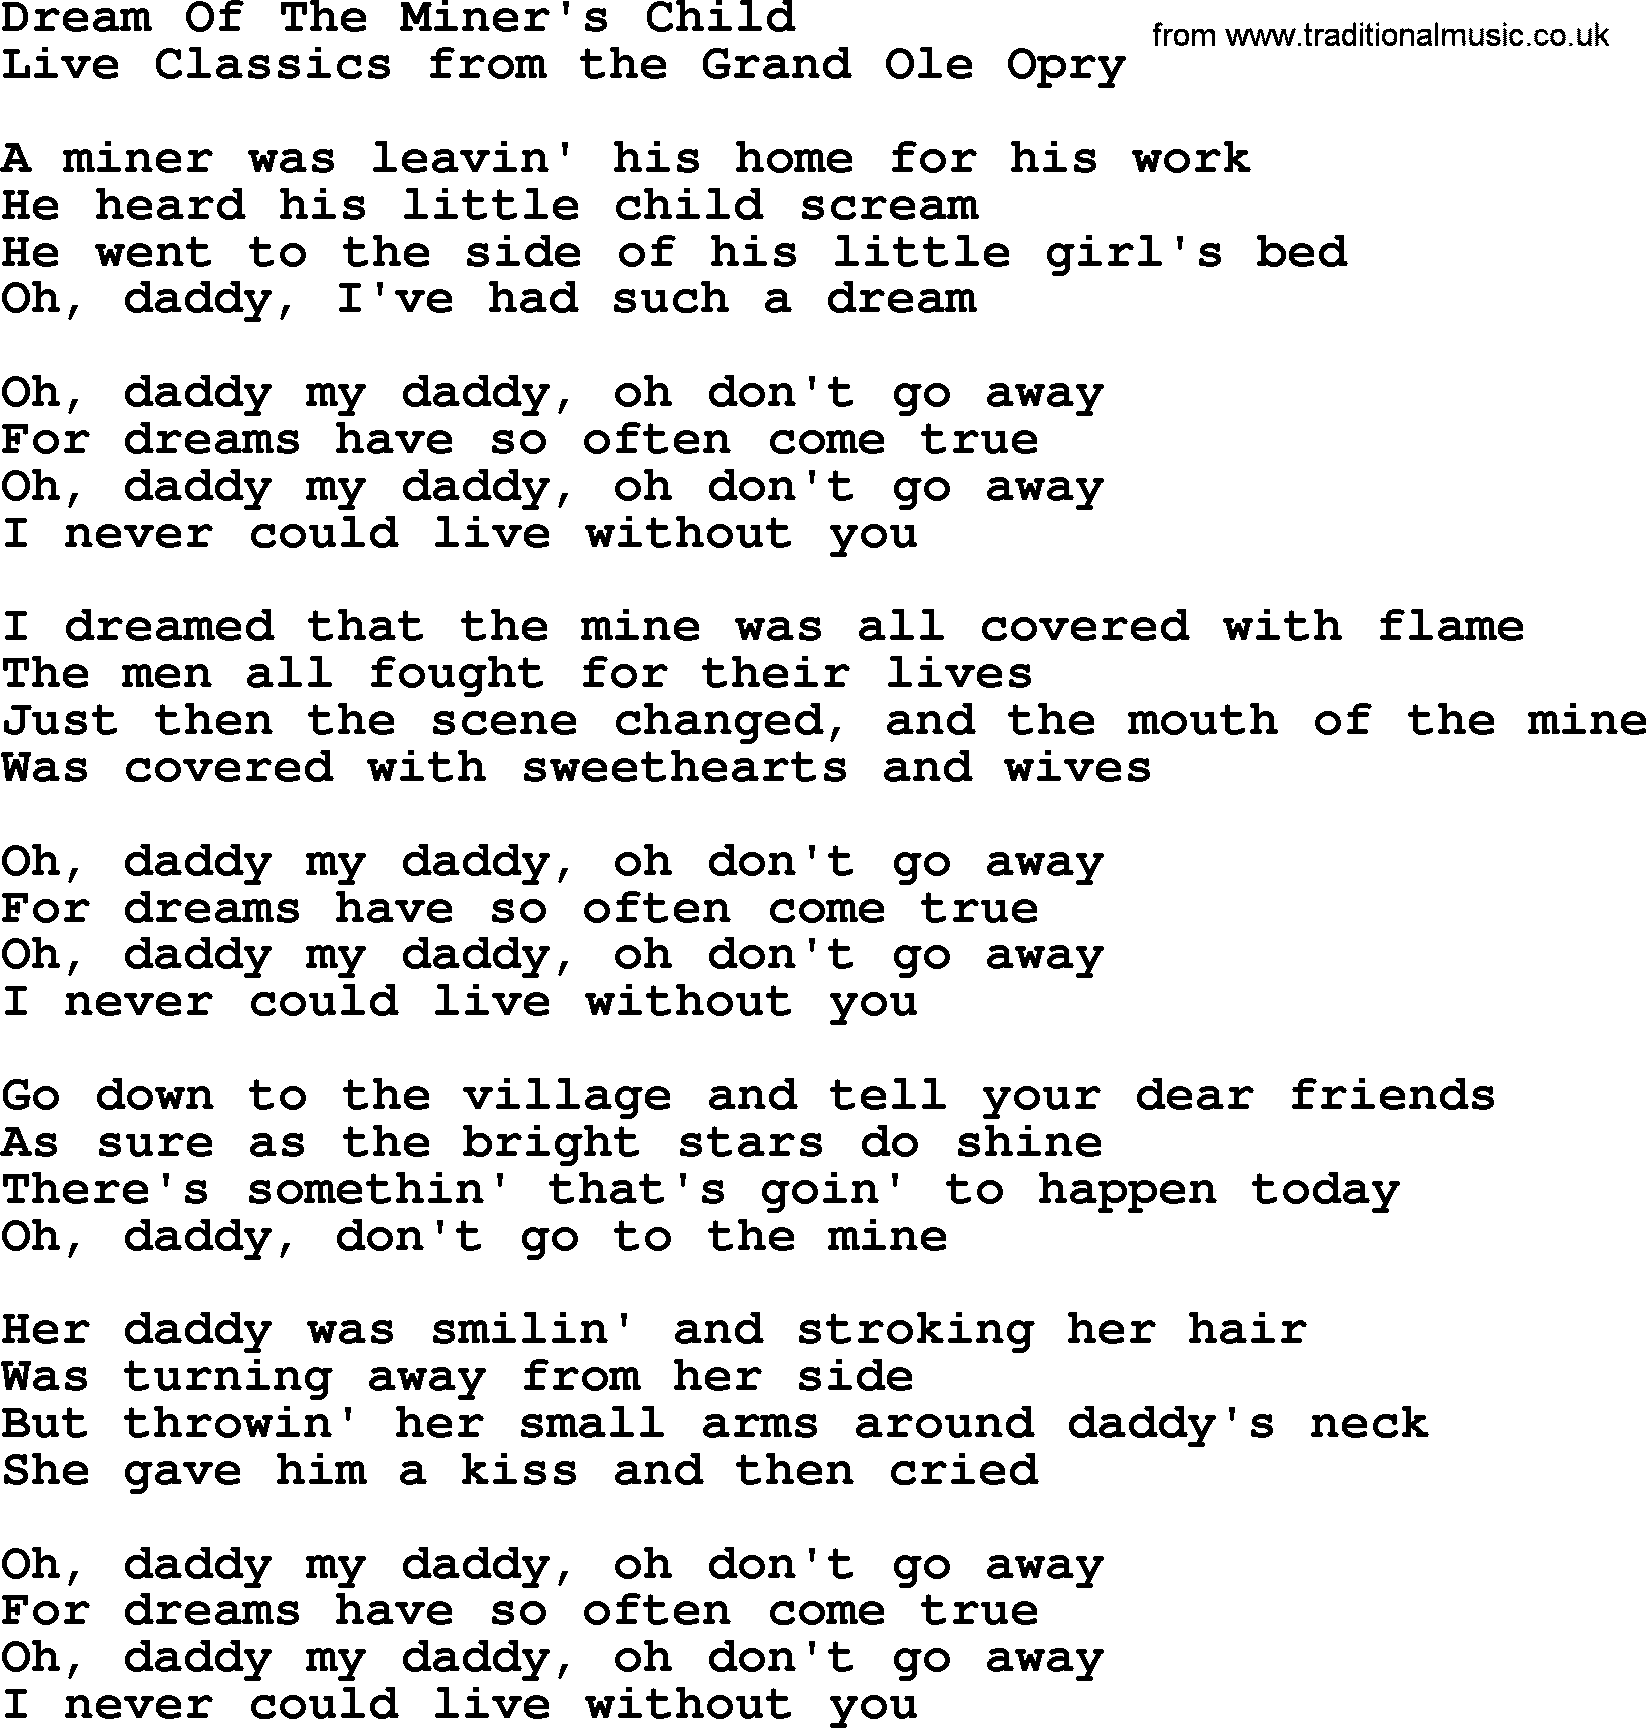 Marty Robbins song: Dream Of The Miners Child, lyrics